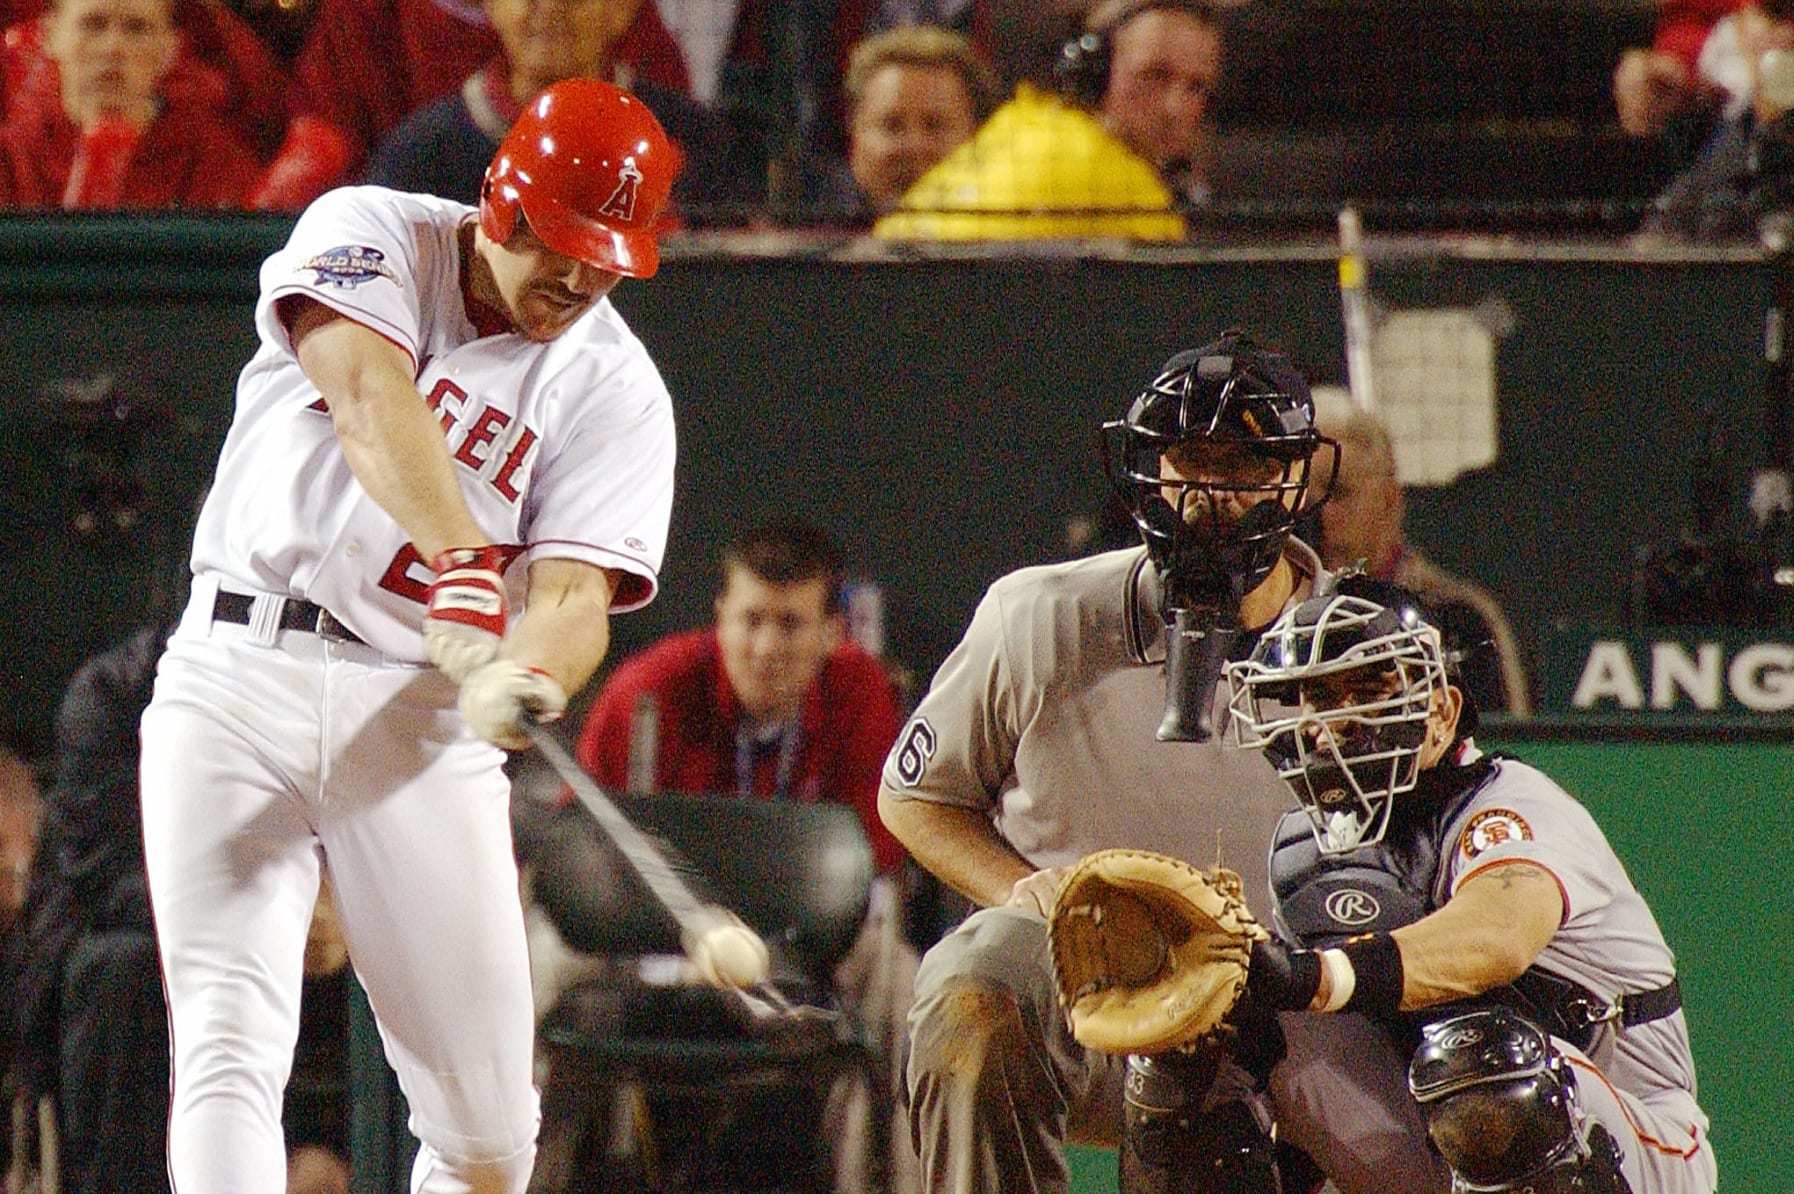 Freese's walkoff blast sends Series to Game 7